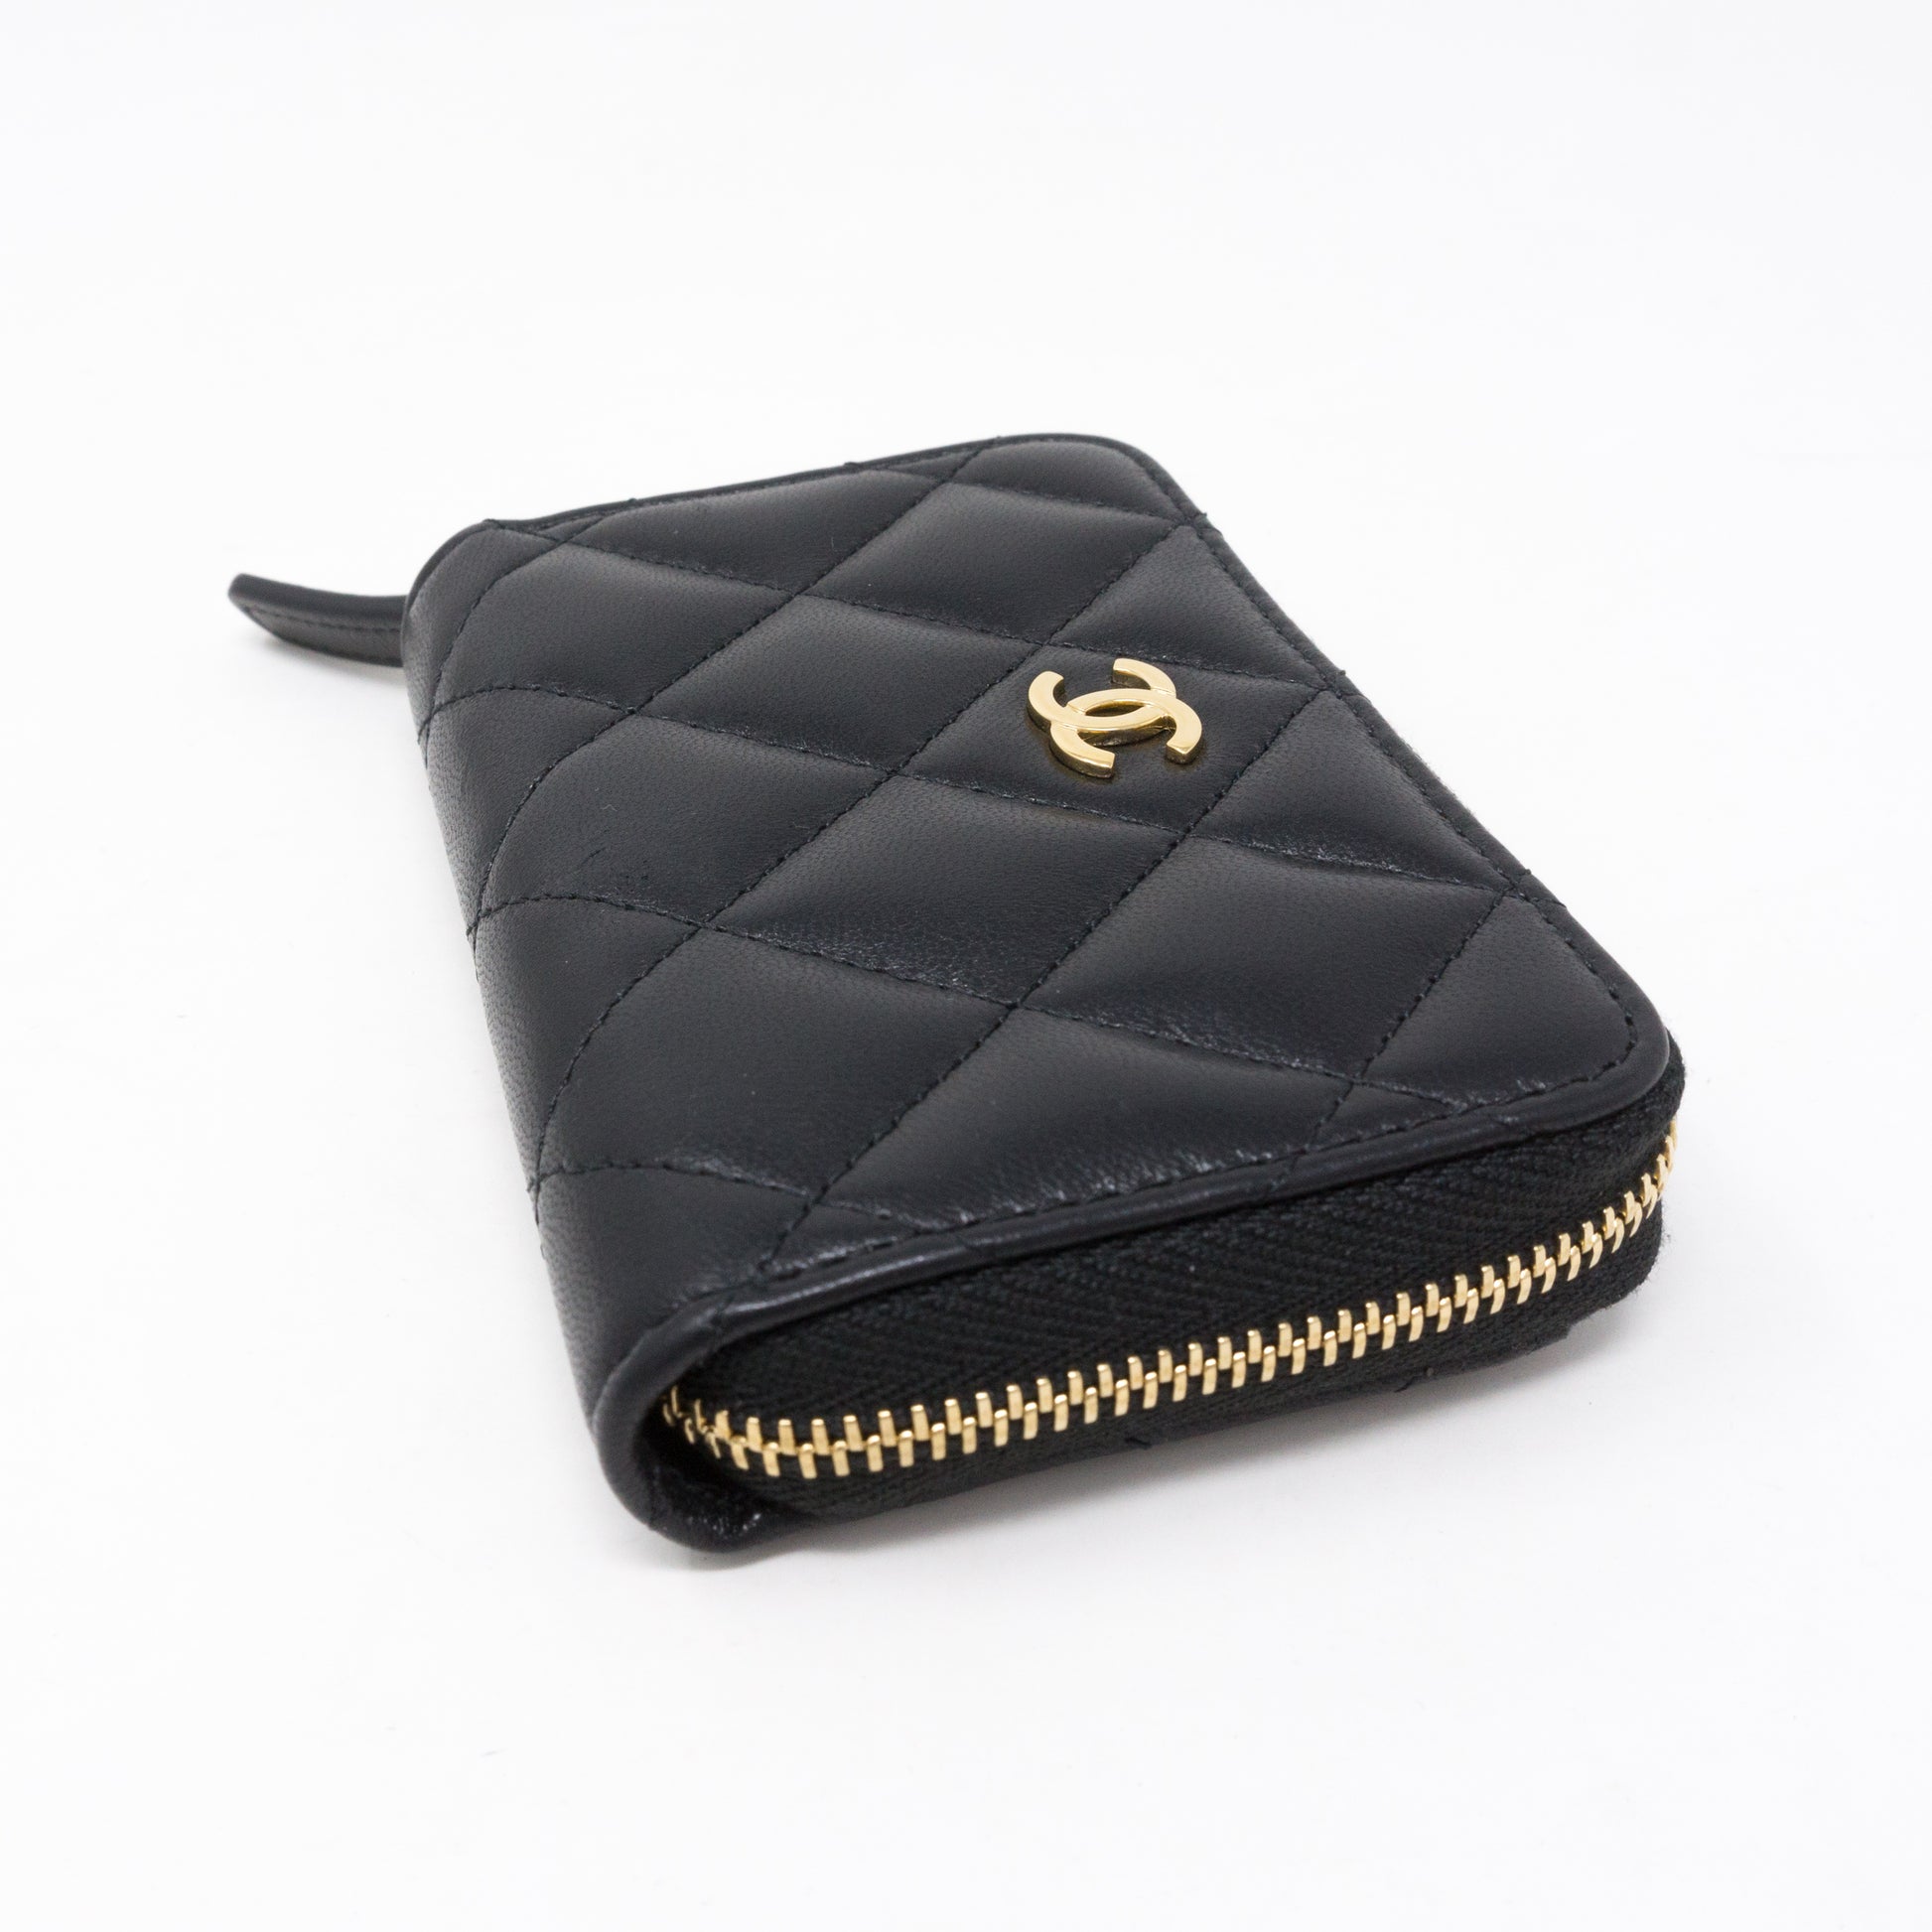 Chanel Classic Zipped Coin Purse - Review and What Fits Inside 